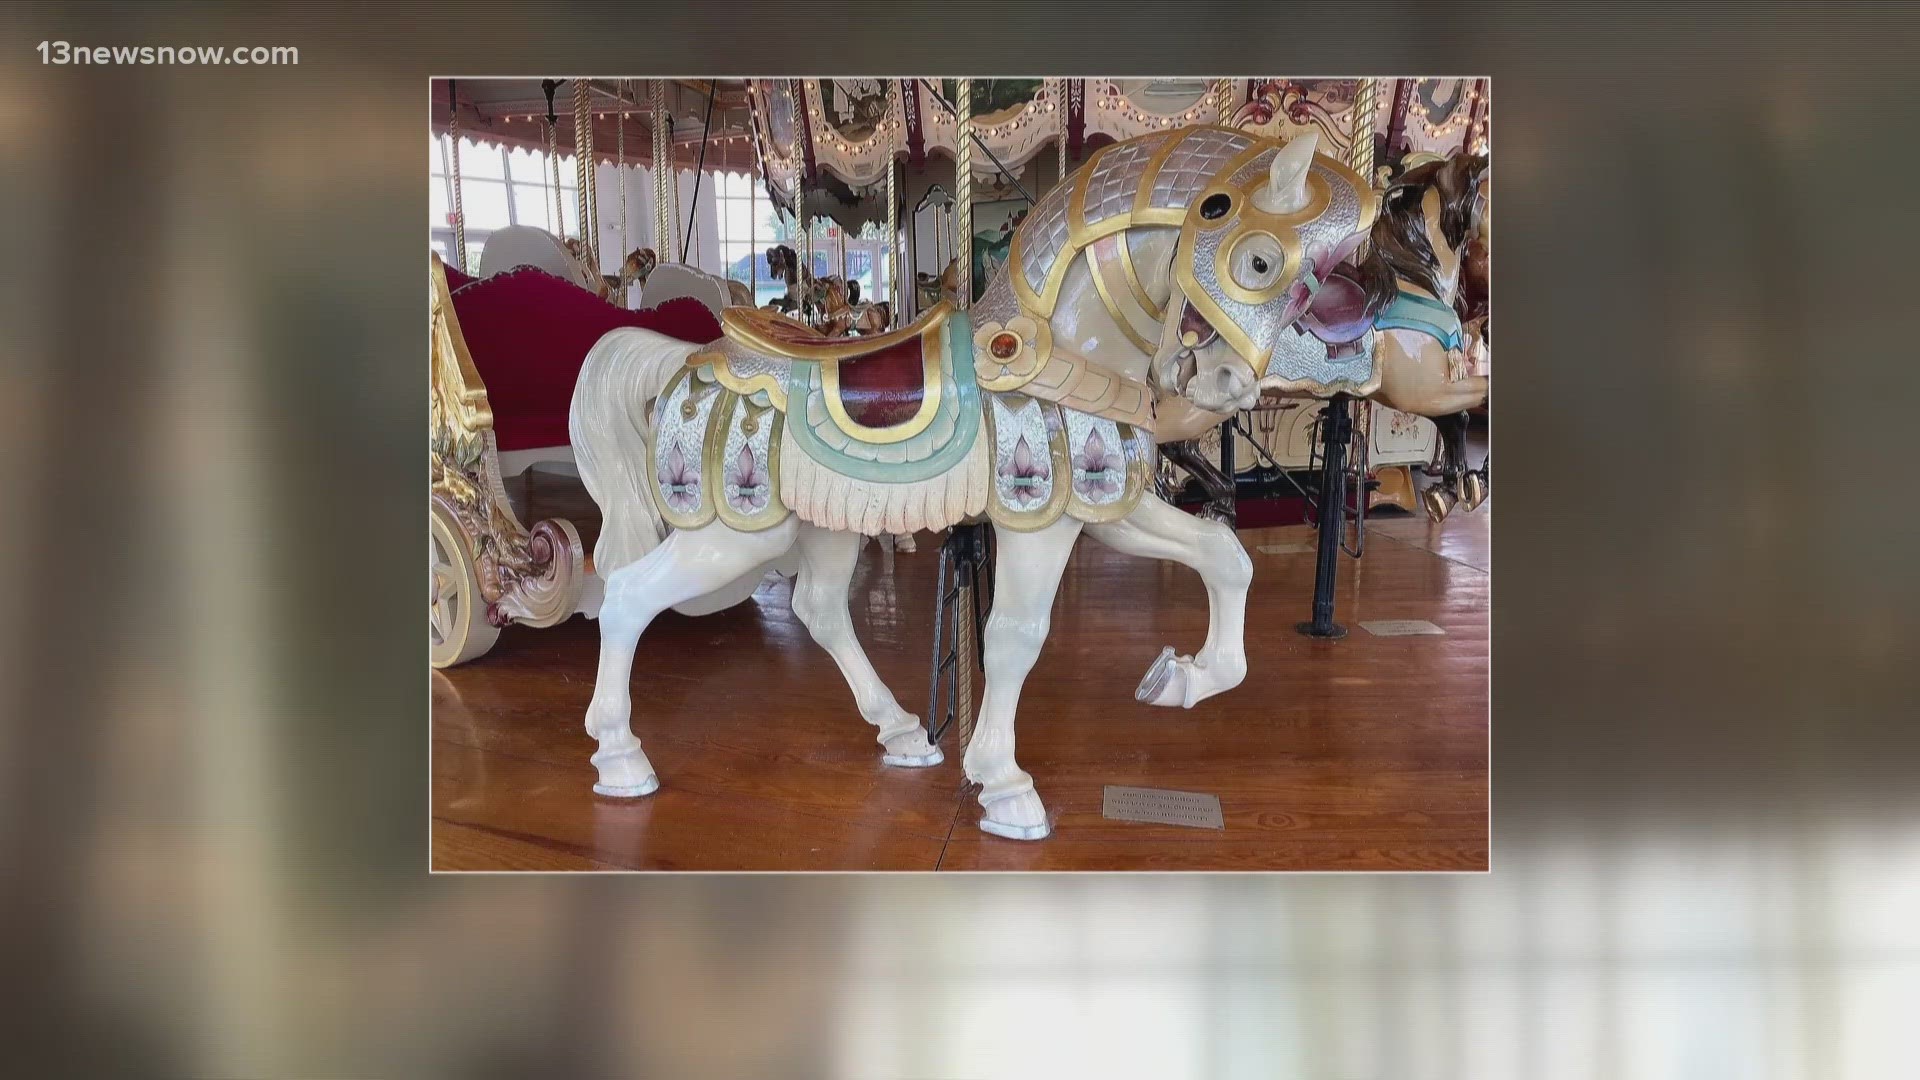 Housed in a pavilion in Hampton's downtown waterfront, it is one of only 170 antique wooden merry-go-rounds remaining in the country.